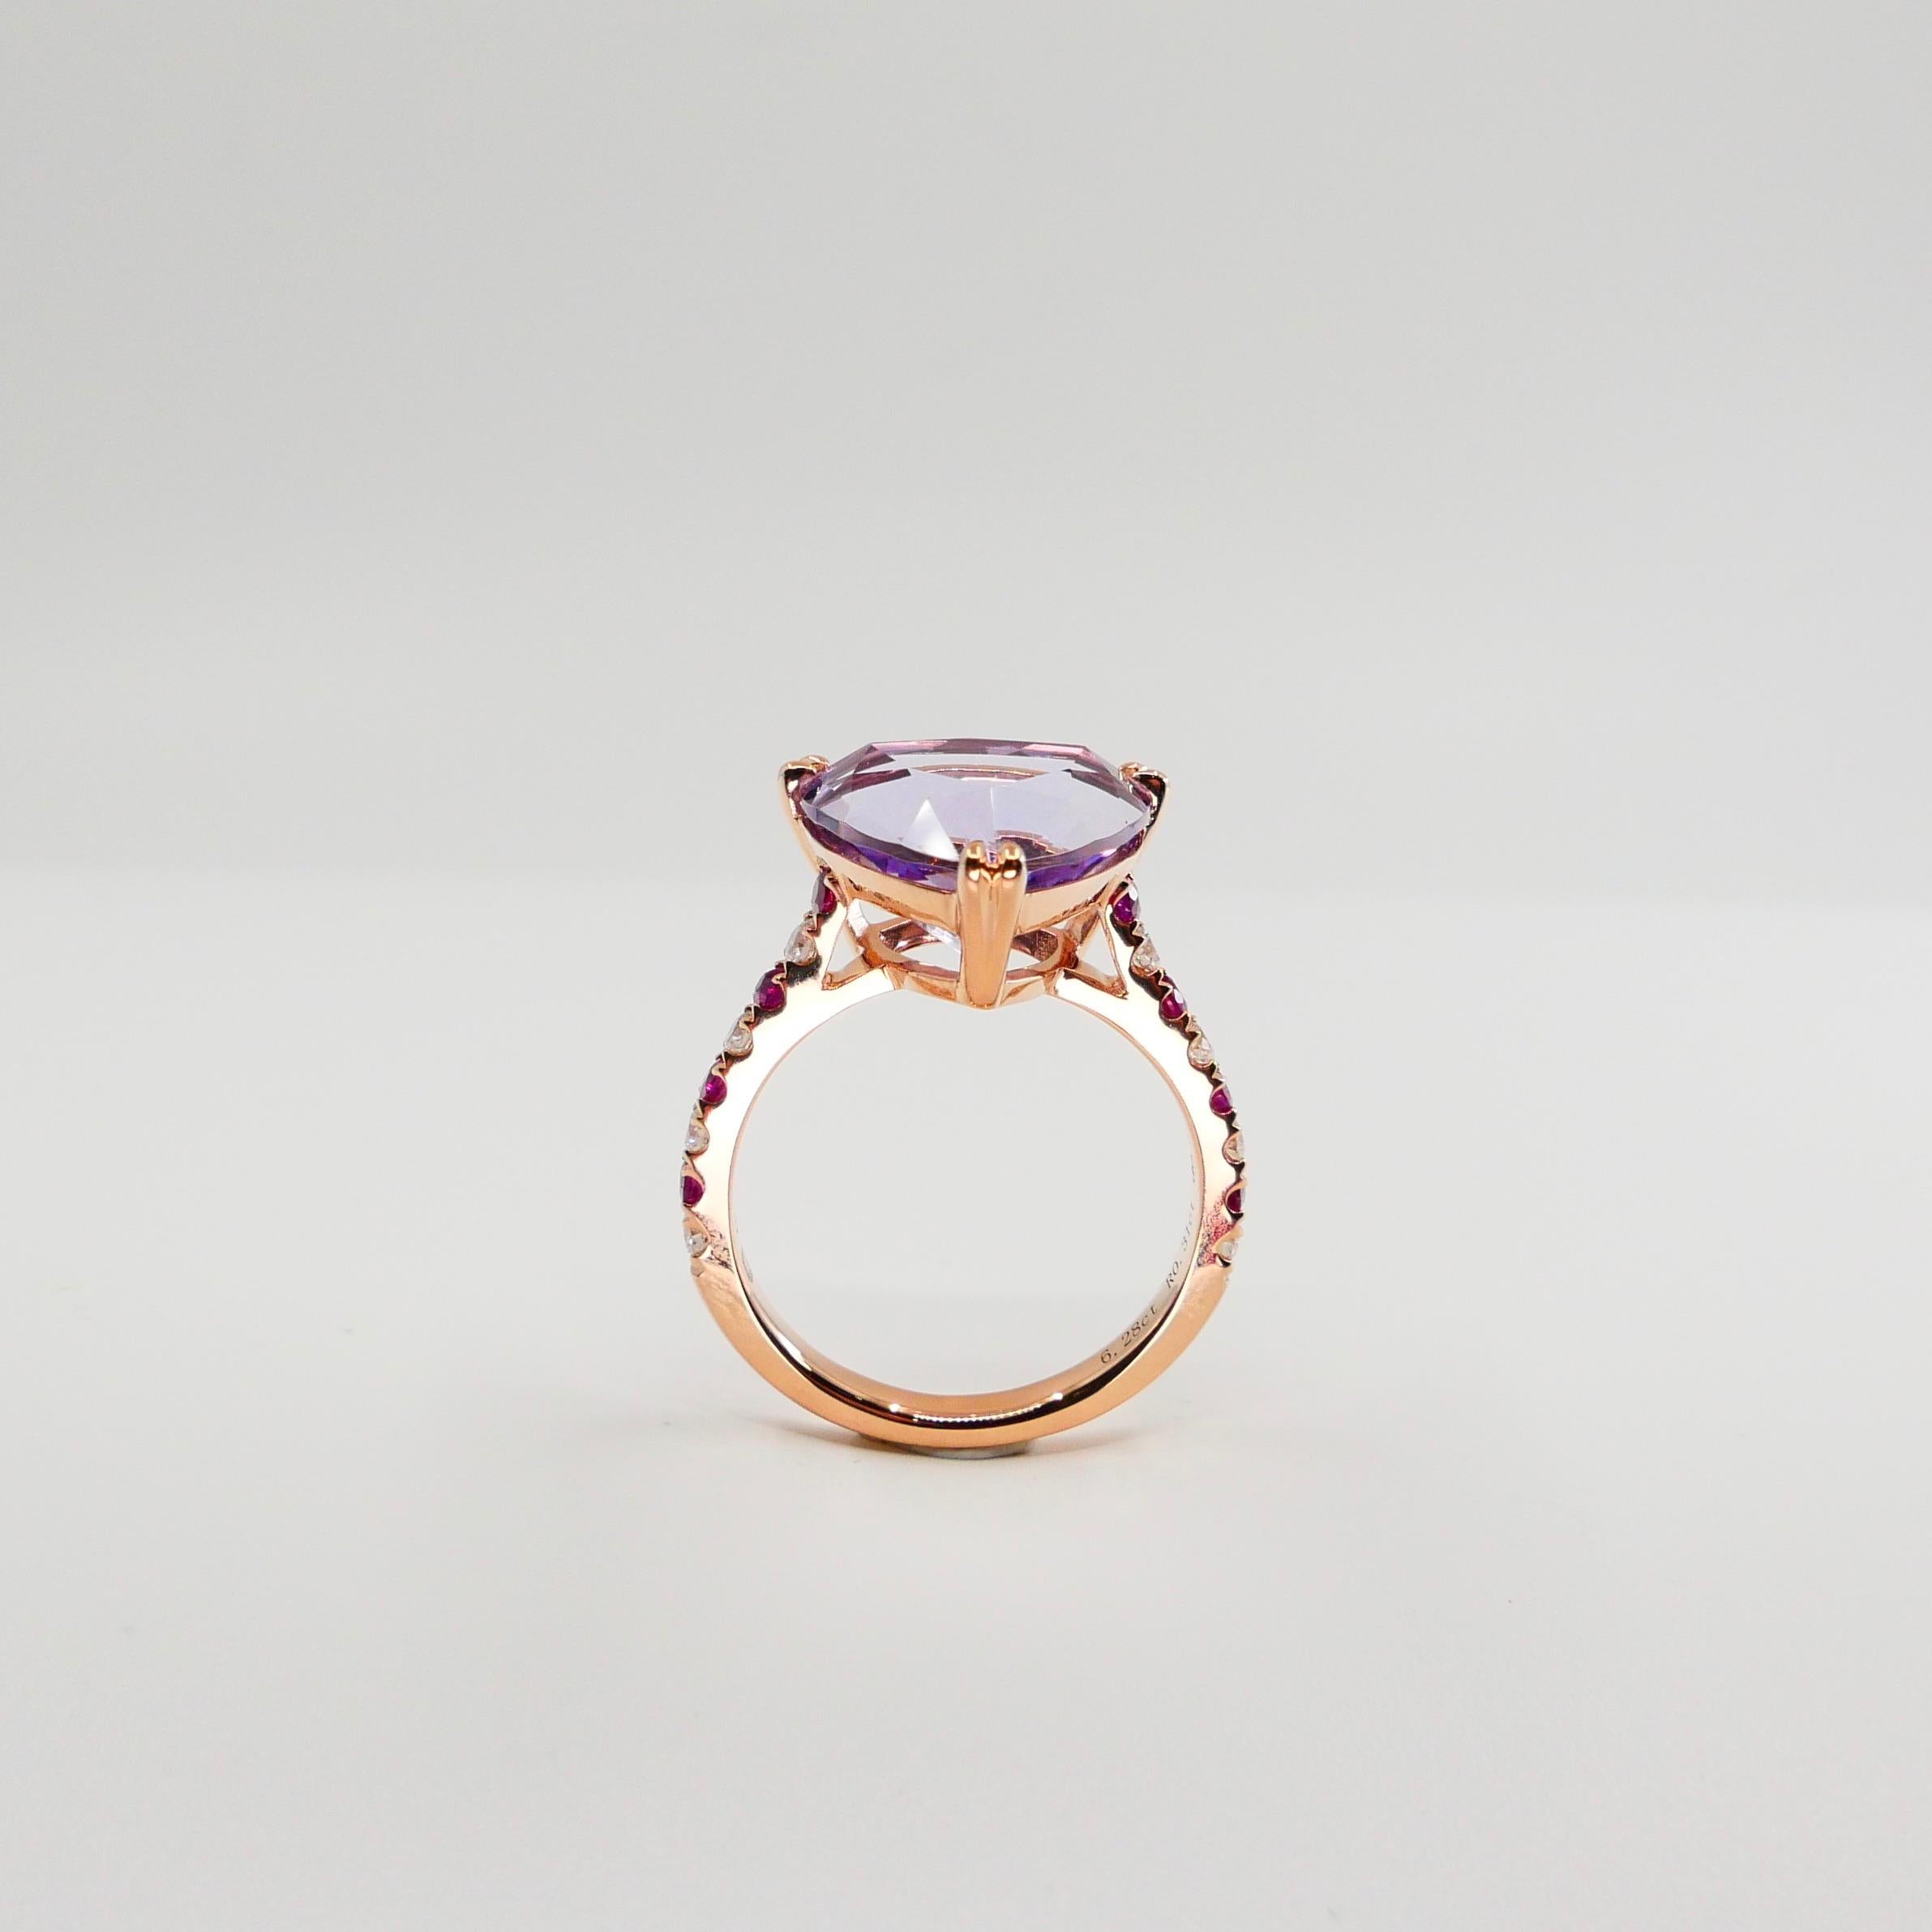 Women's 6.28 Carat Trillion Cut Amethyst, Ruby and Diamond Cocktail Ring, 18k Rose Gold For Sale